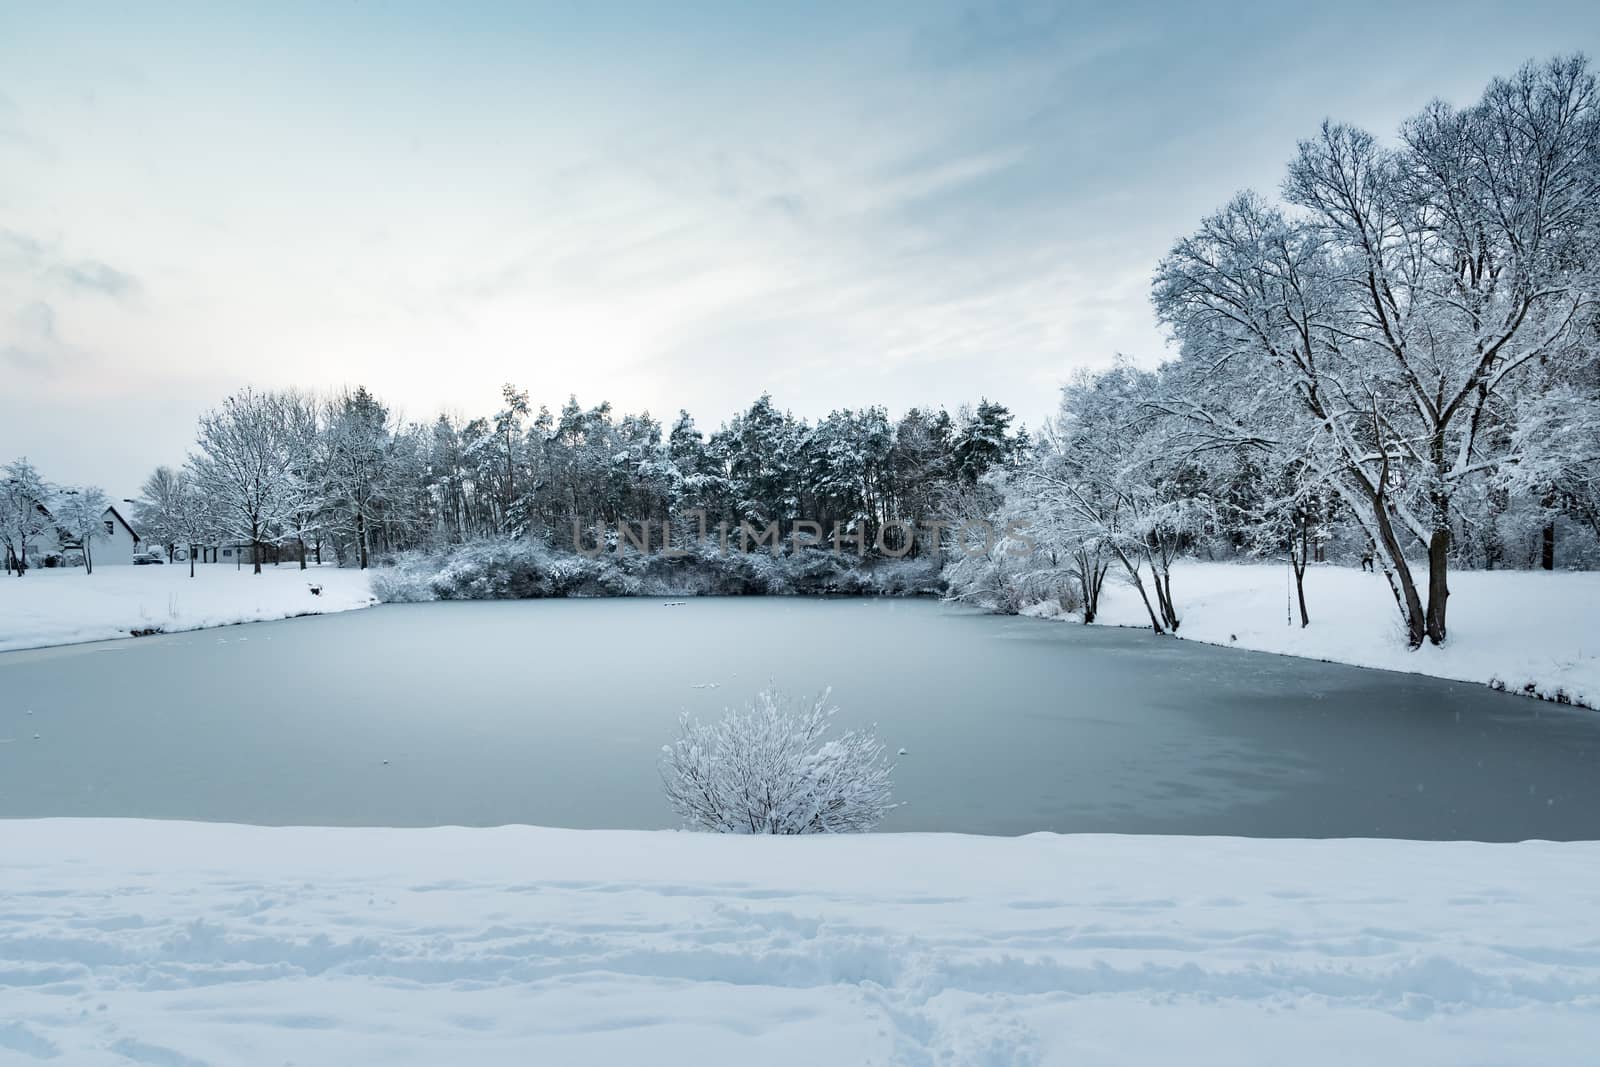 Image of a pond with trees and heavy snow in village Gernlinden by w20er